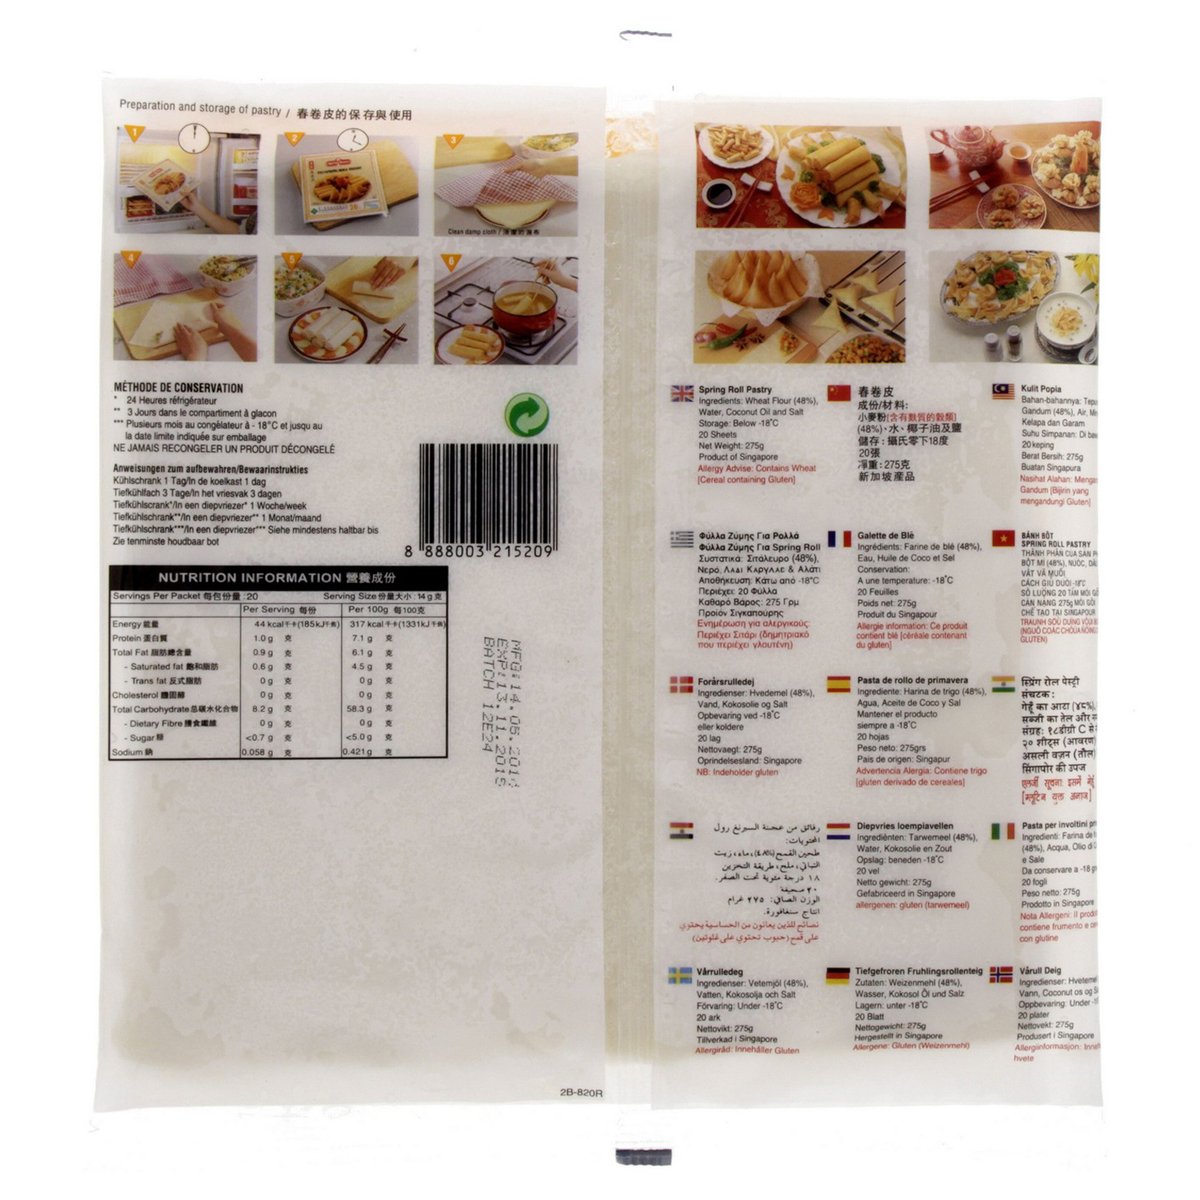 Spring Home TYJ Spring Roll Pastry 20 Sheets 275 g